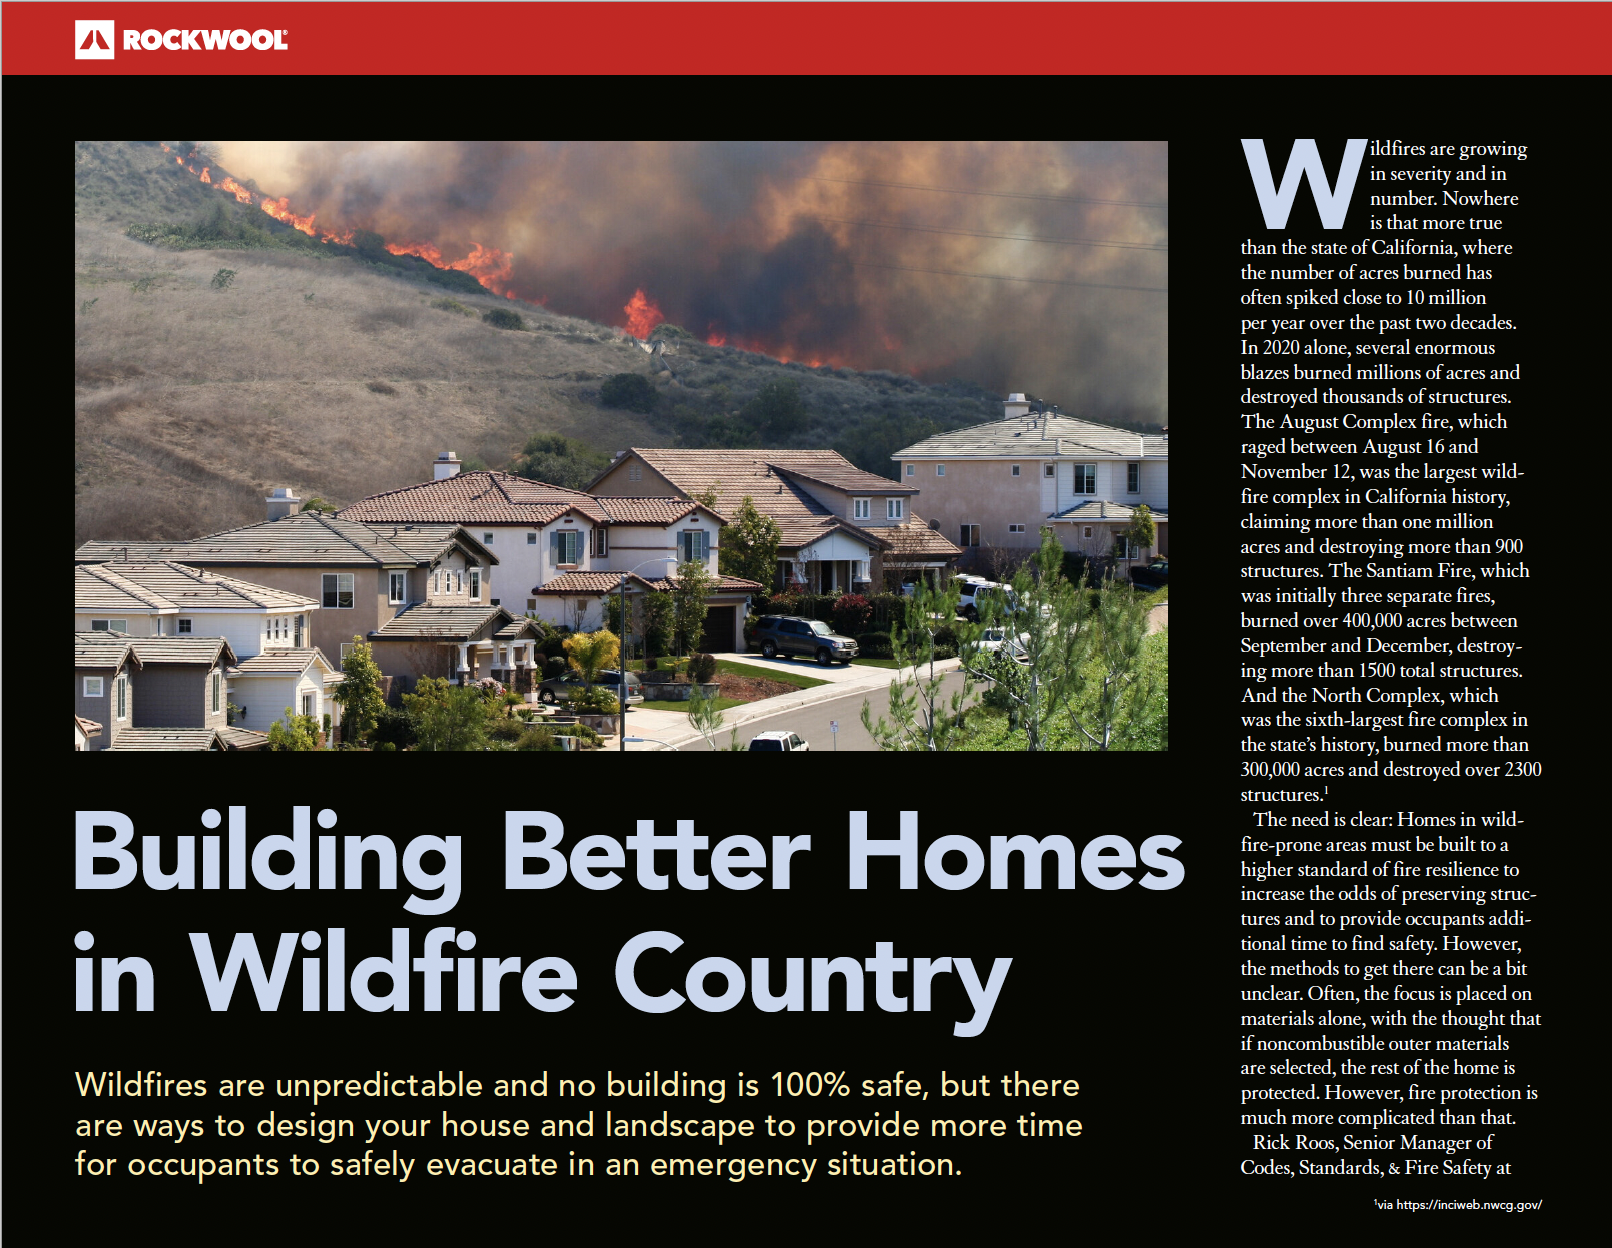 Building Better Homes in Wildfire Country